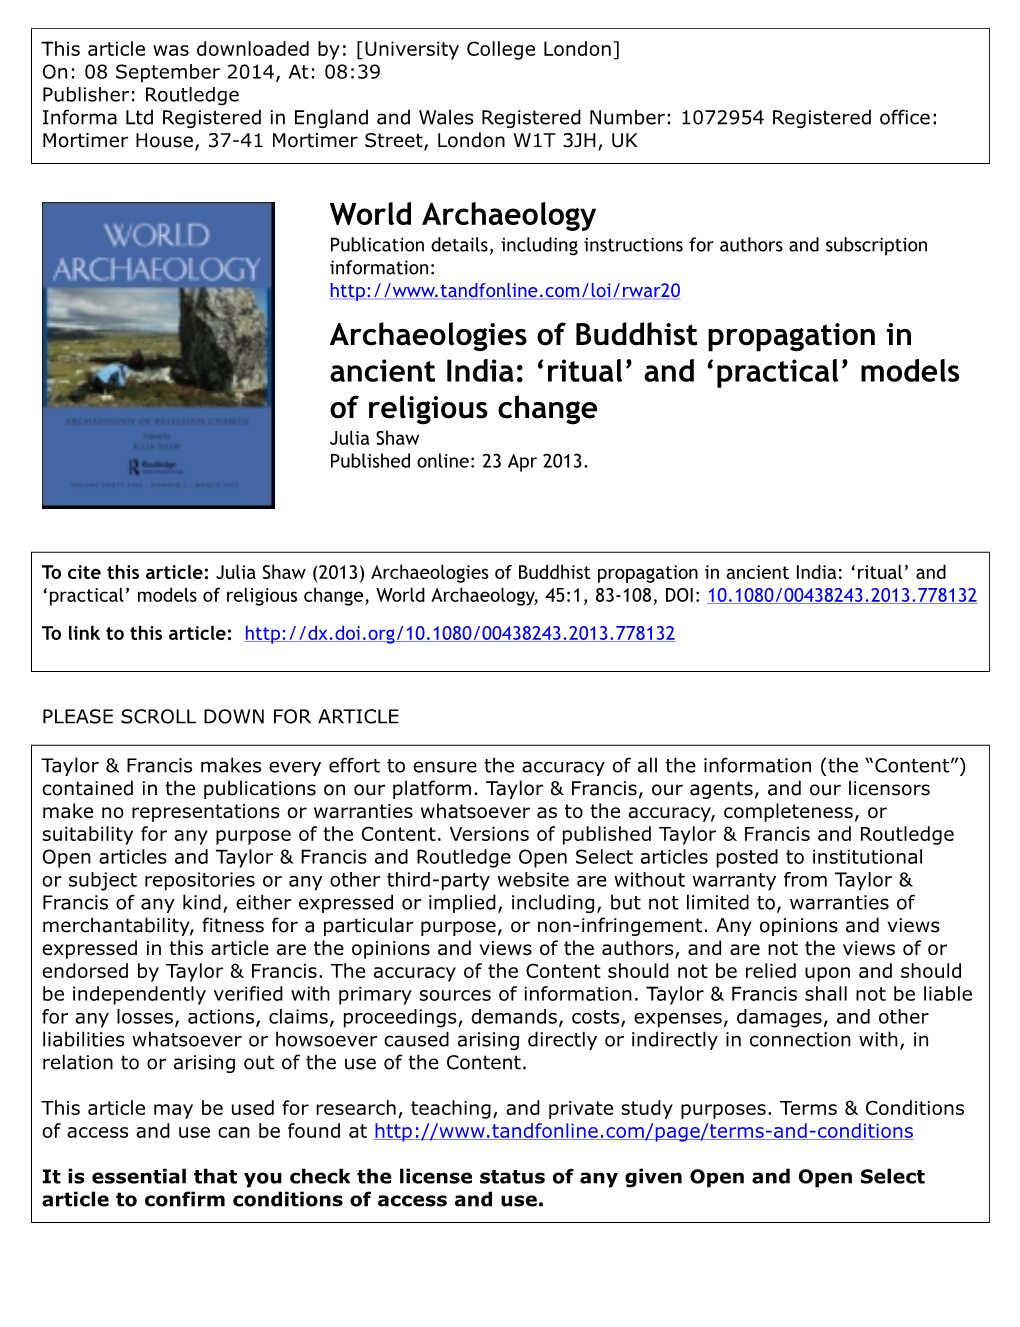 World Archaeology Archaeologies of Buddhist Propagation in Ancient